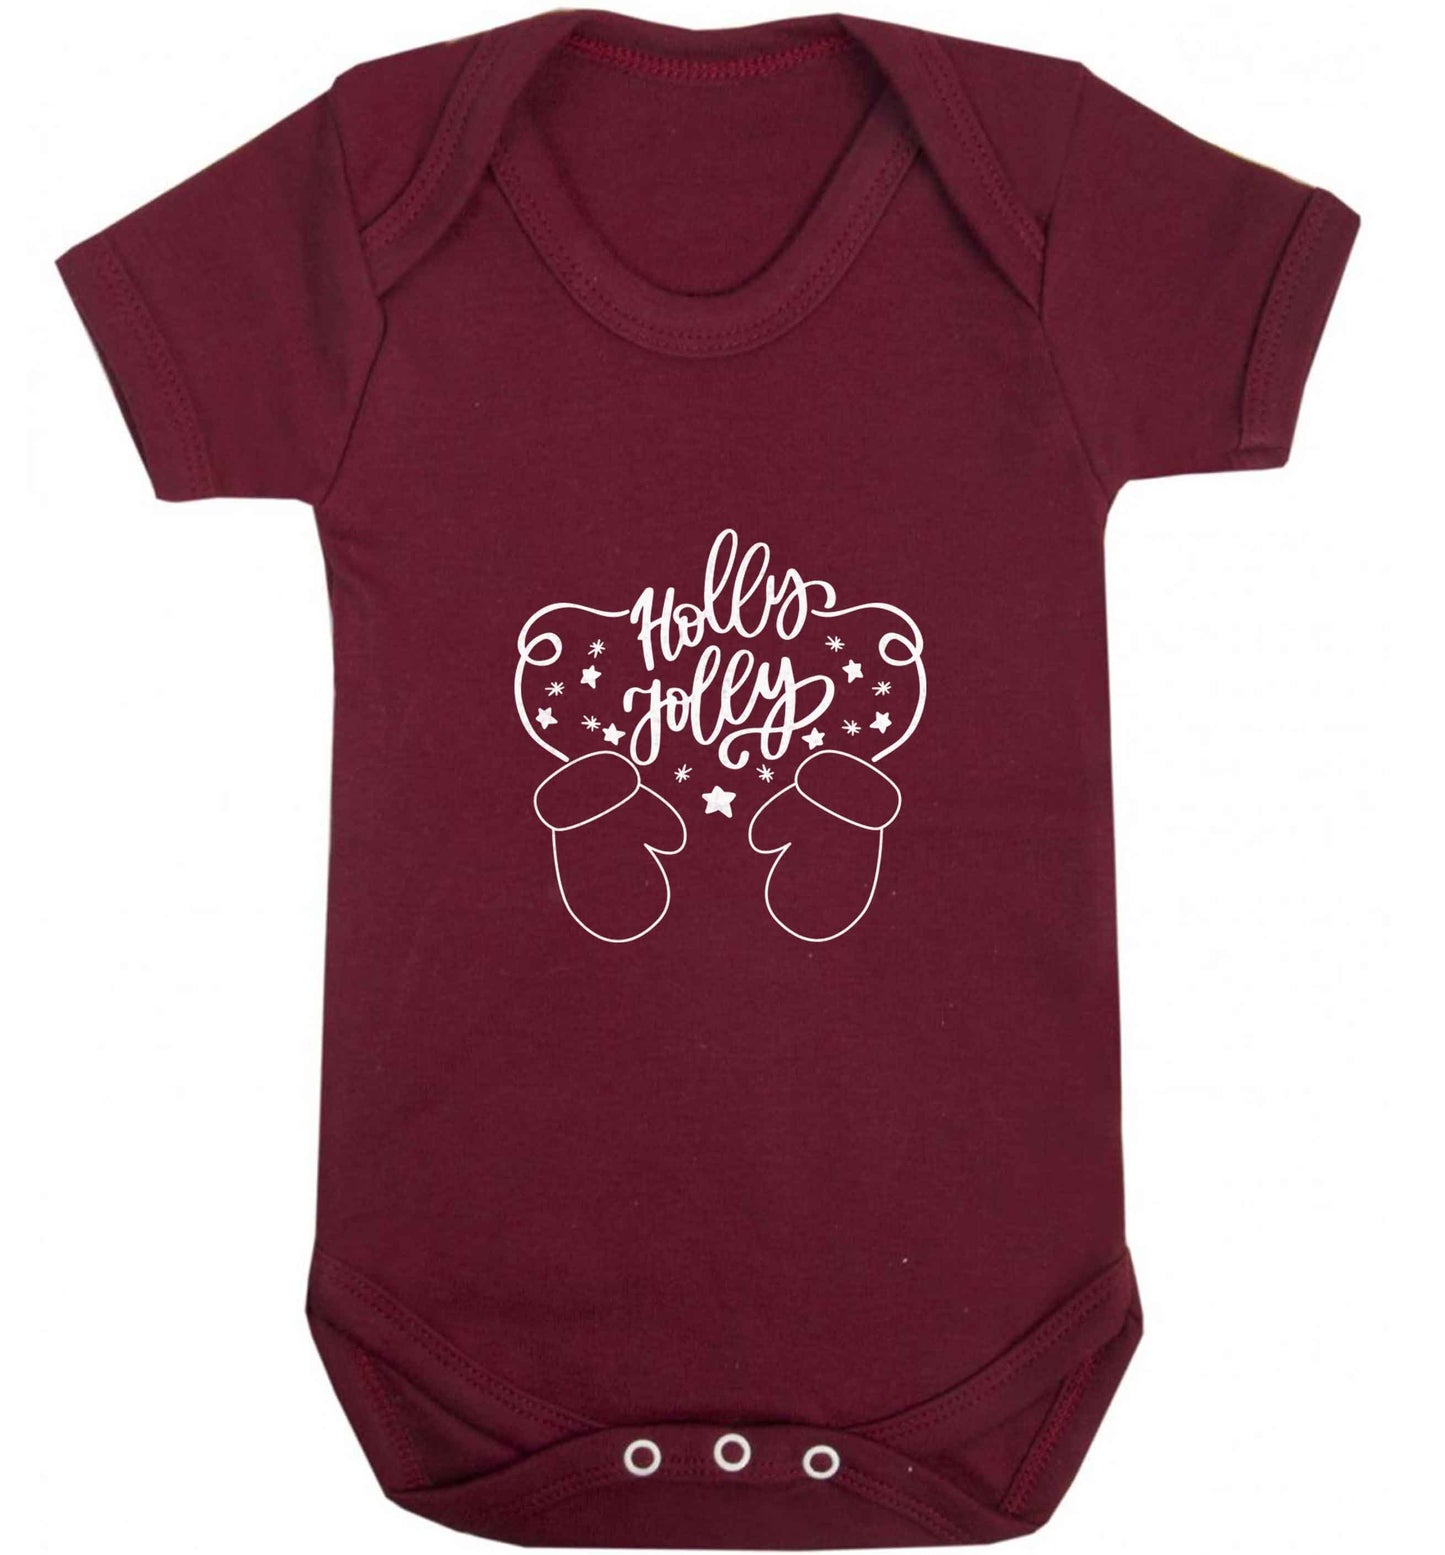 Holly jolly baby vest maroon 18-24 months